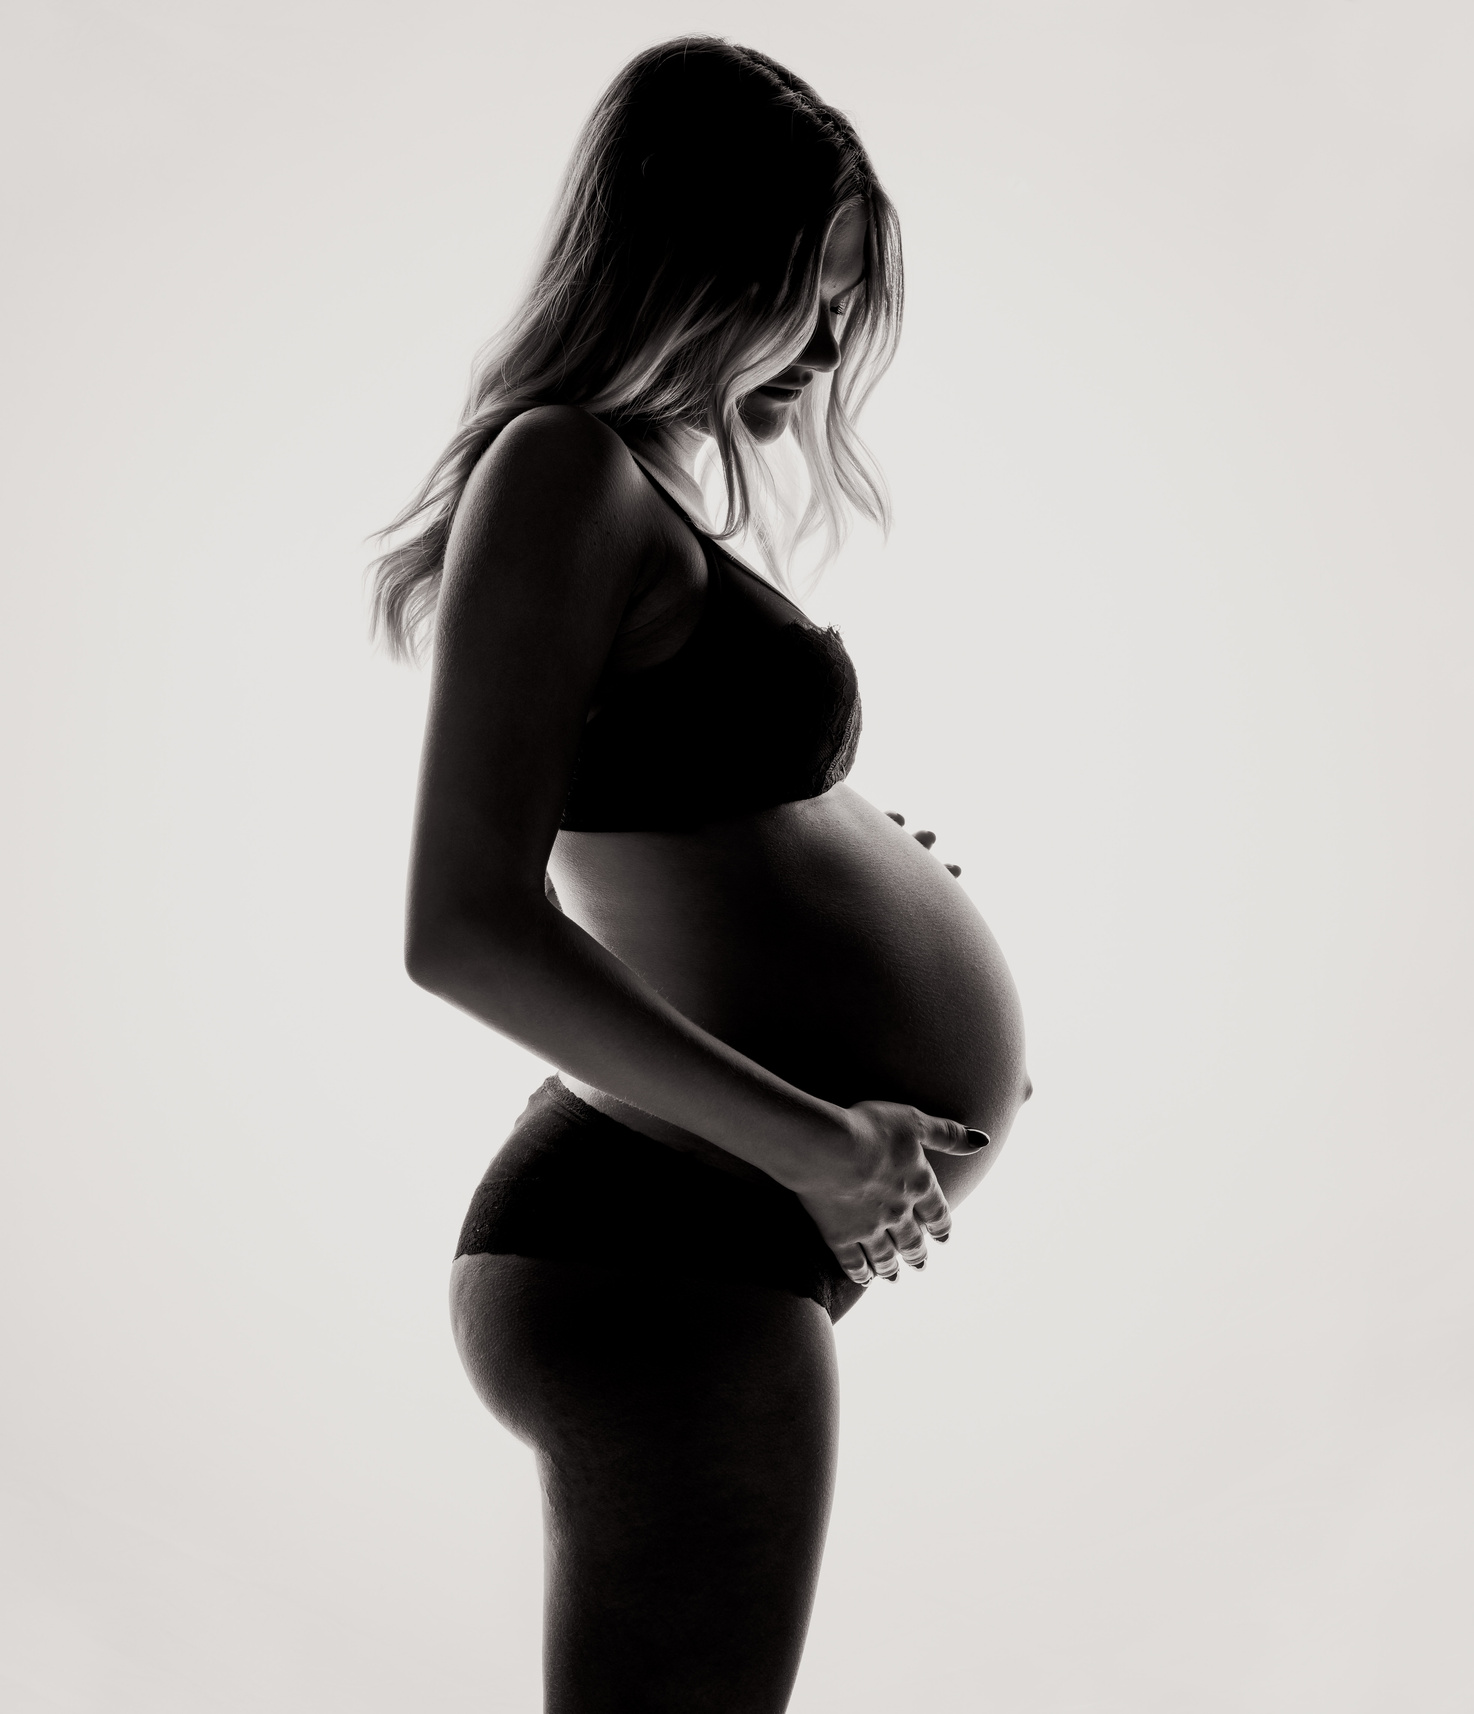 Profile of pregnant woman in underwear with hands on belly in black and white in front of white background. 

Midwife Kaleigh supports active labor in home births. 